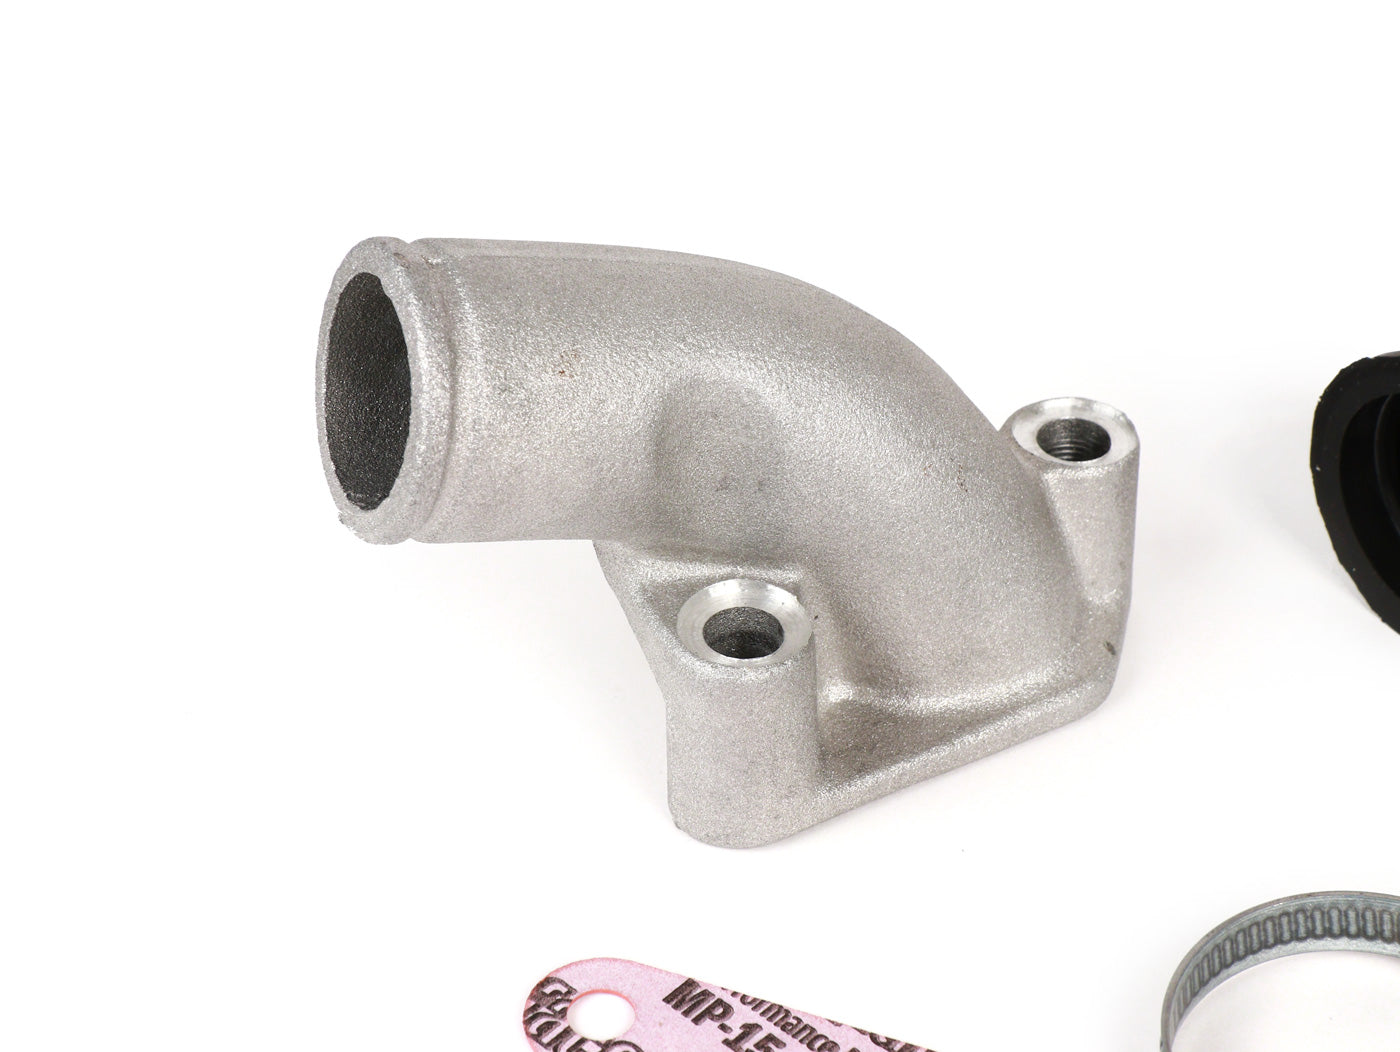 Vespa PX T5 Super Rally T5 POLINI Intake Manifold for PHBH 28/30 VHS 25-30 PWK 28/30 Carburettor